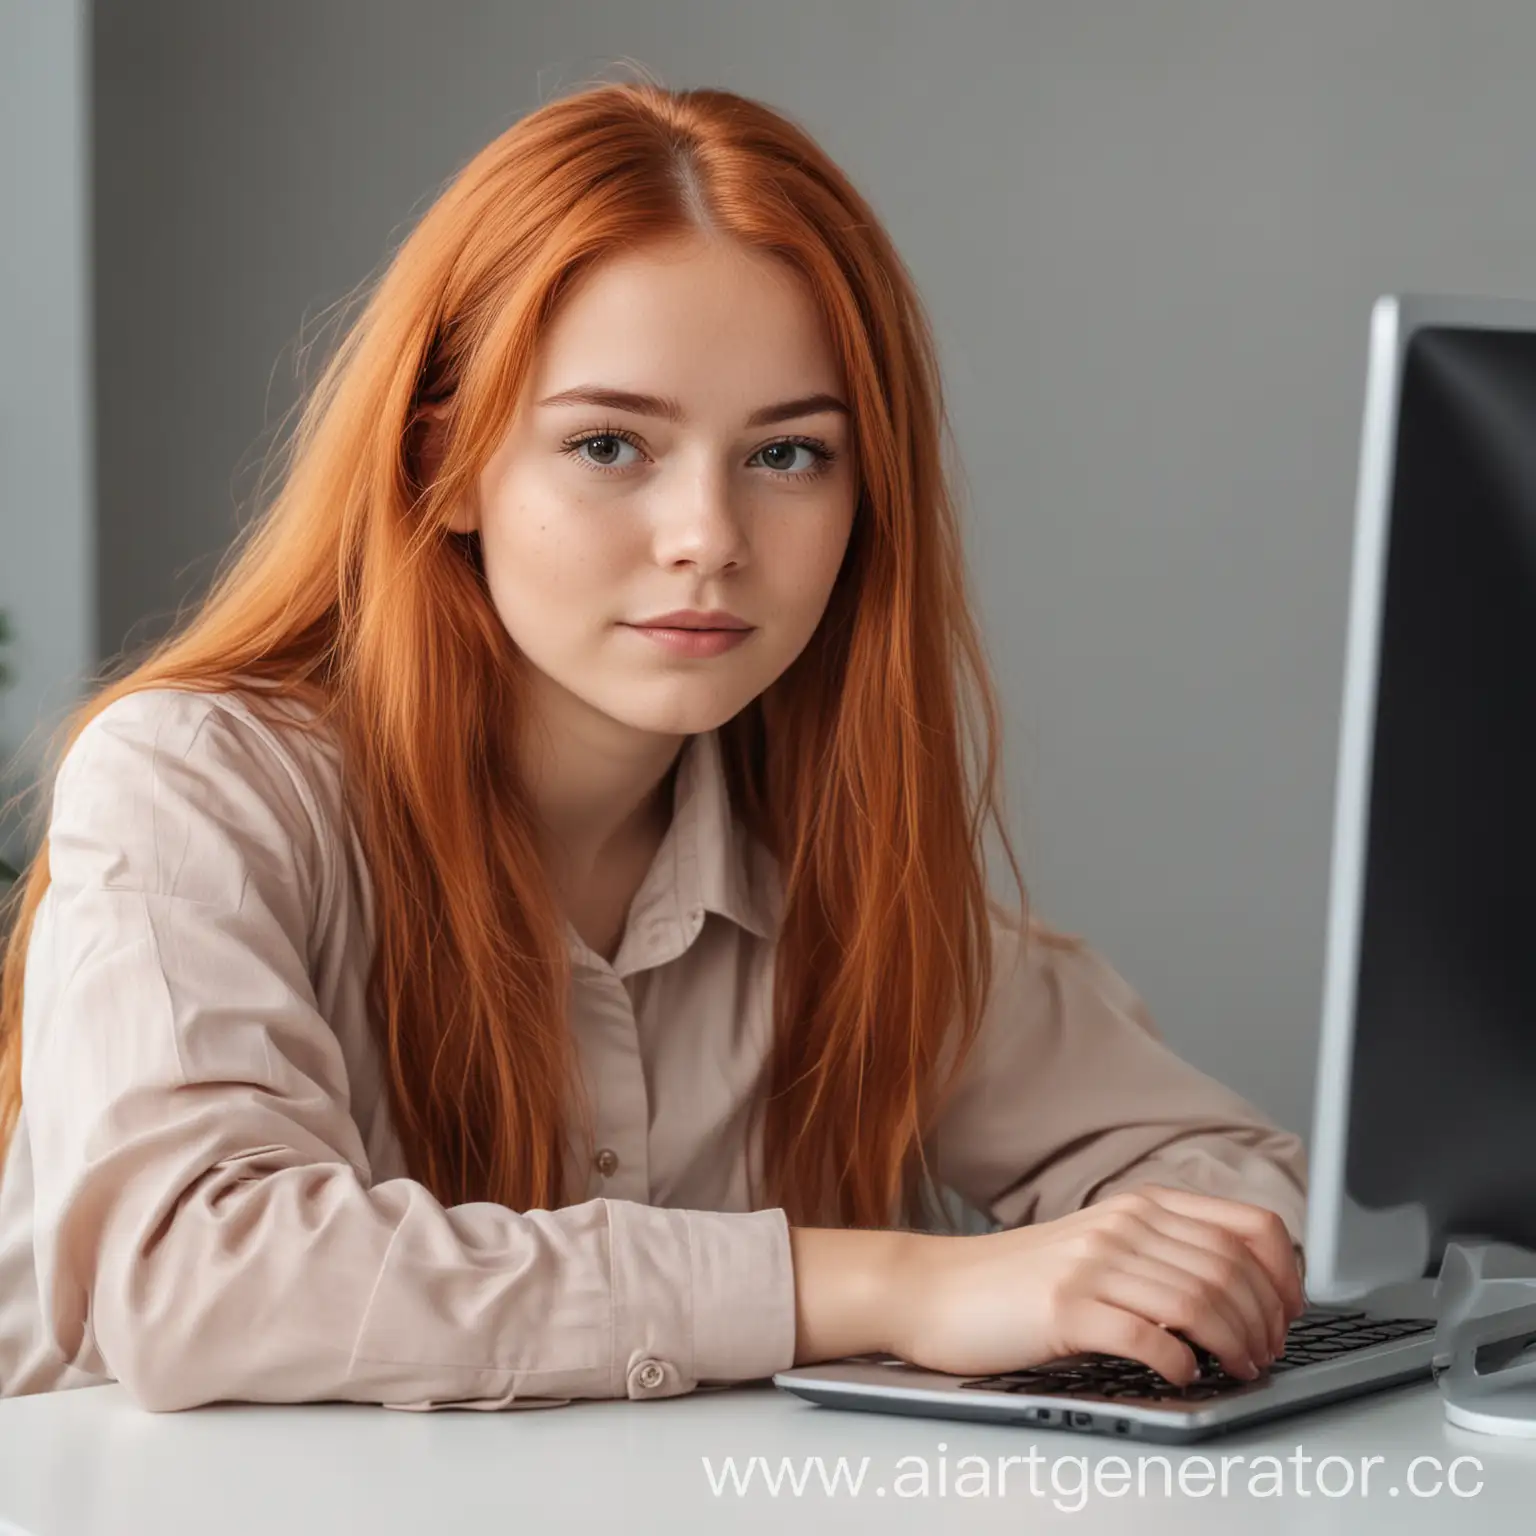 young product manager girl with copper hair sitting near to computer
